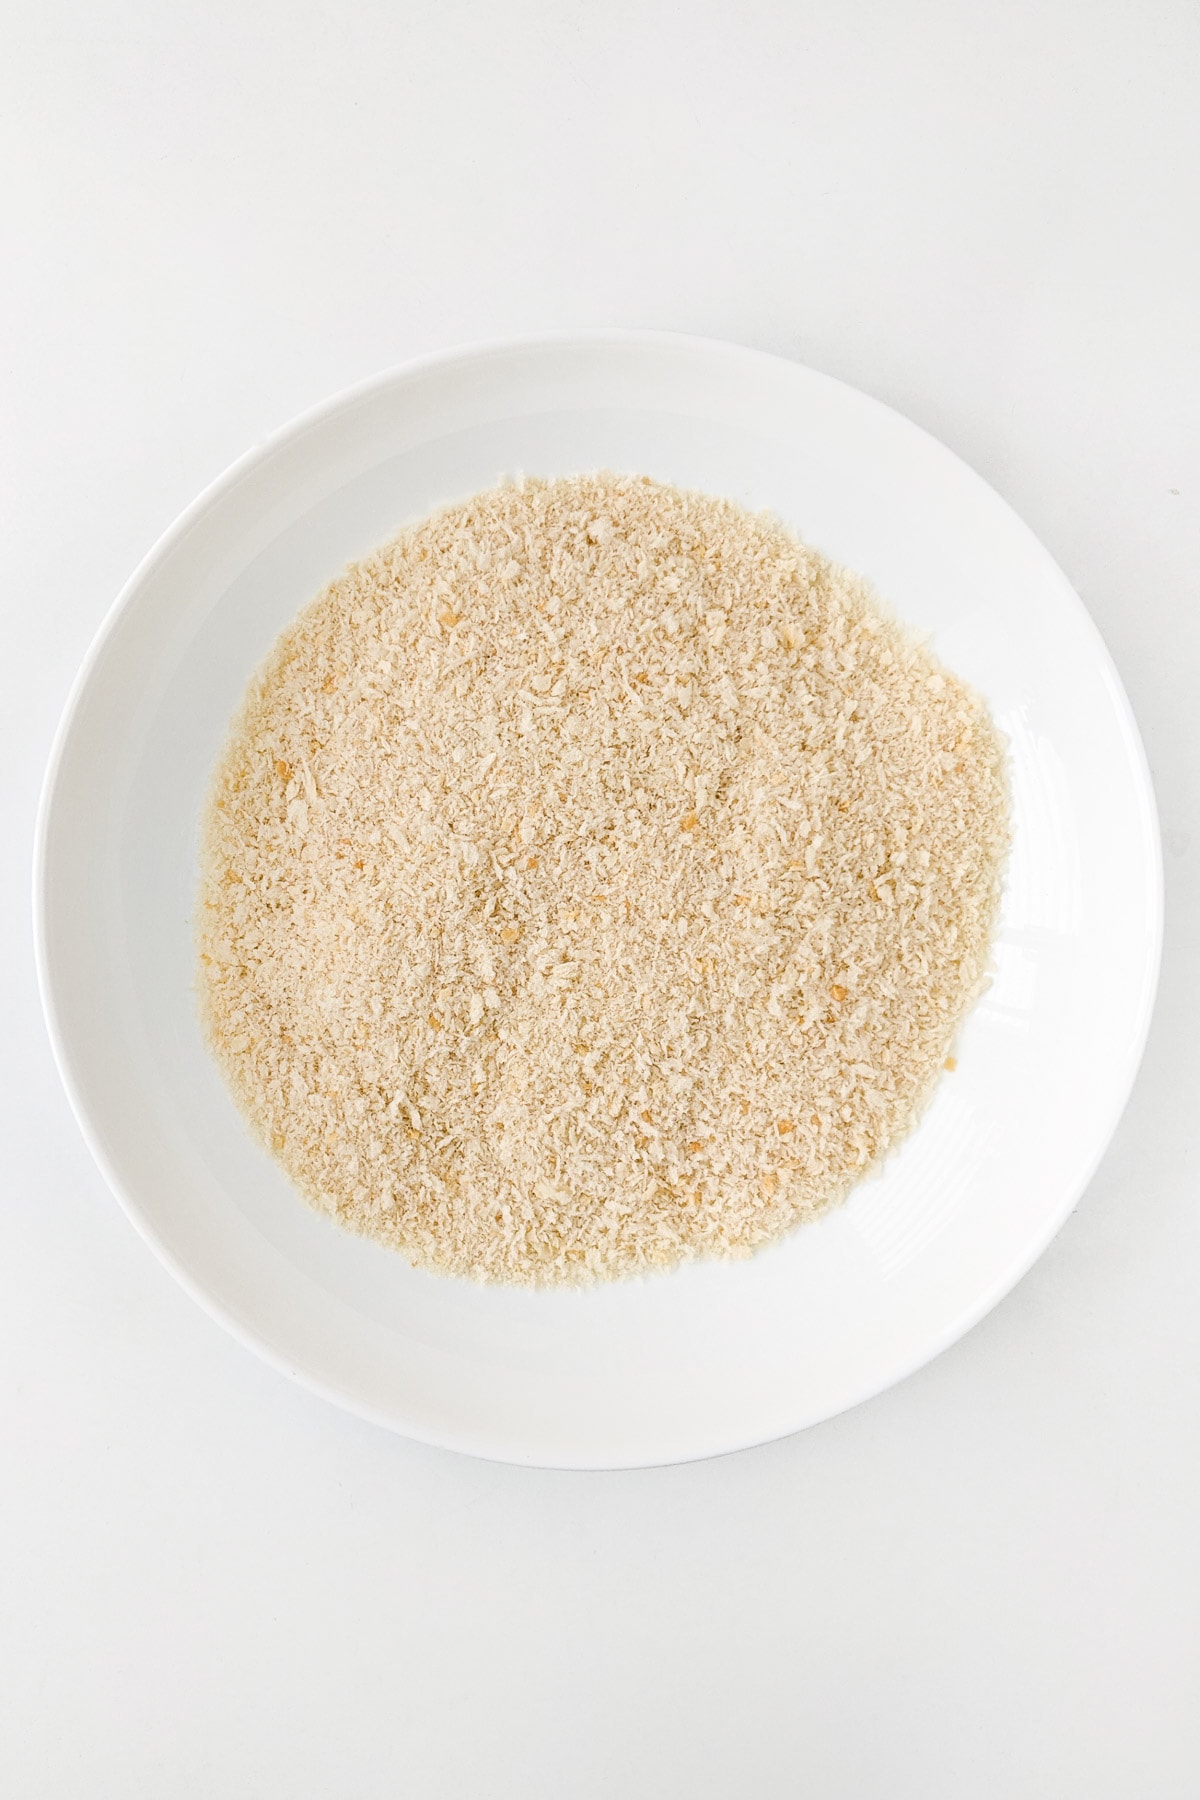 White plate with panko on a white table.